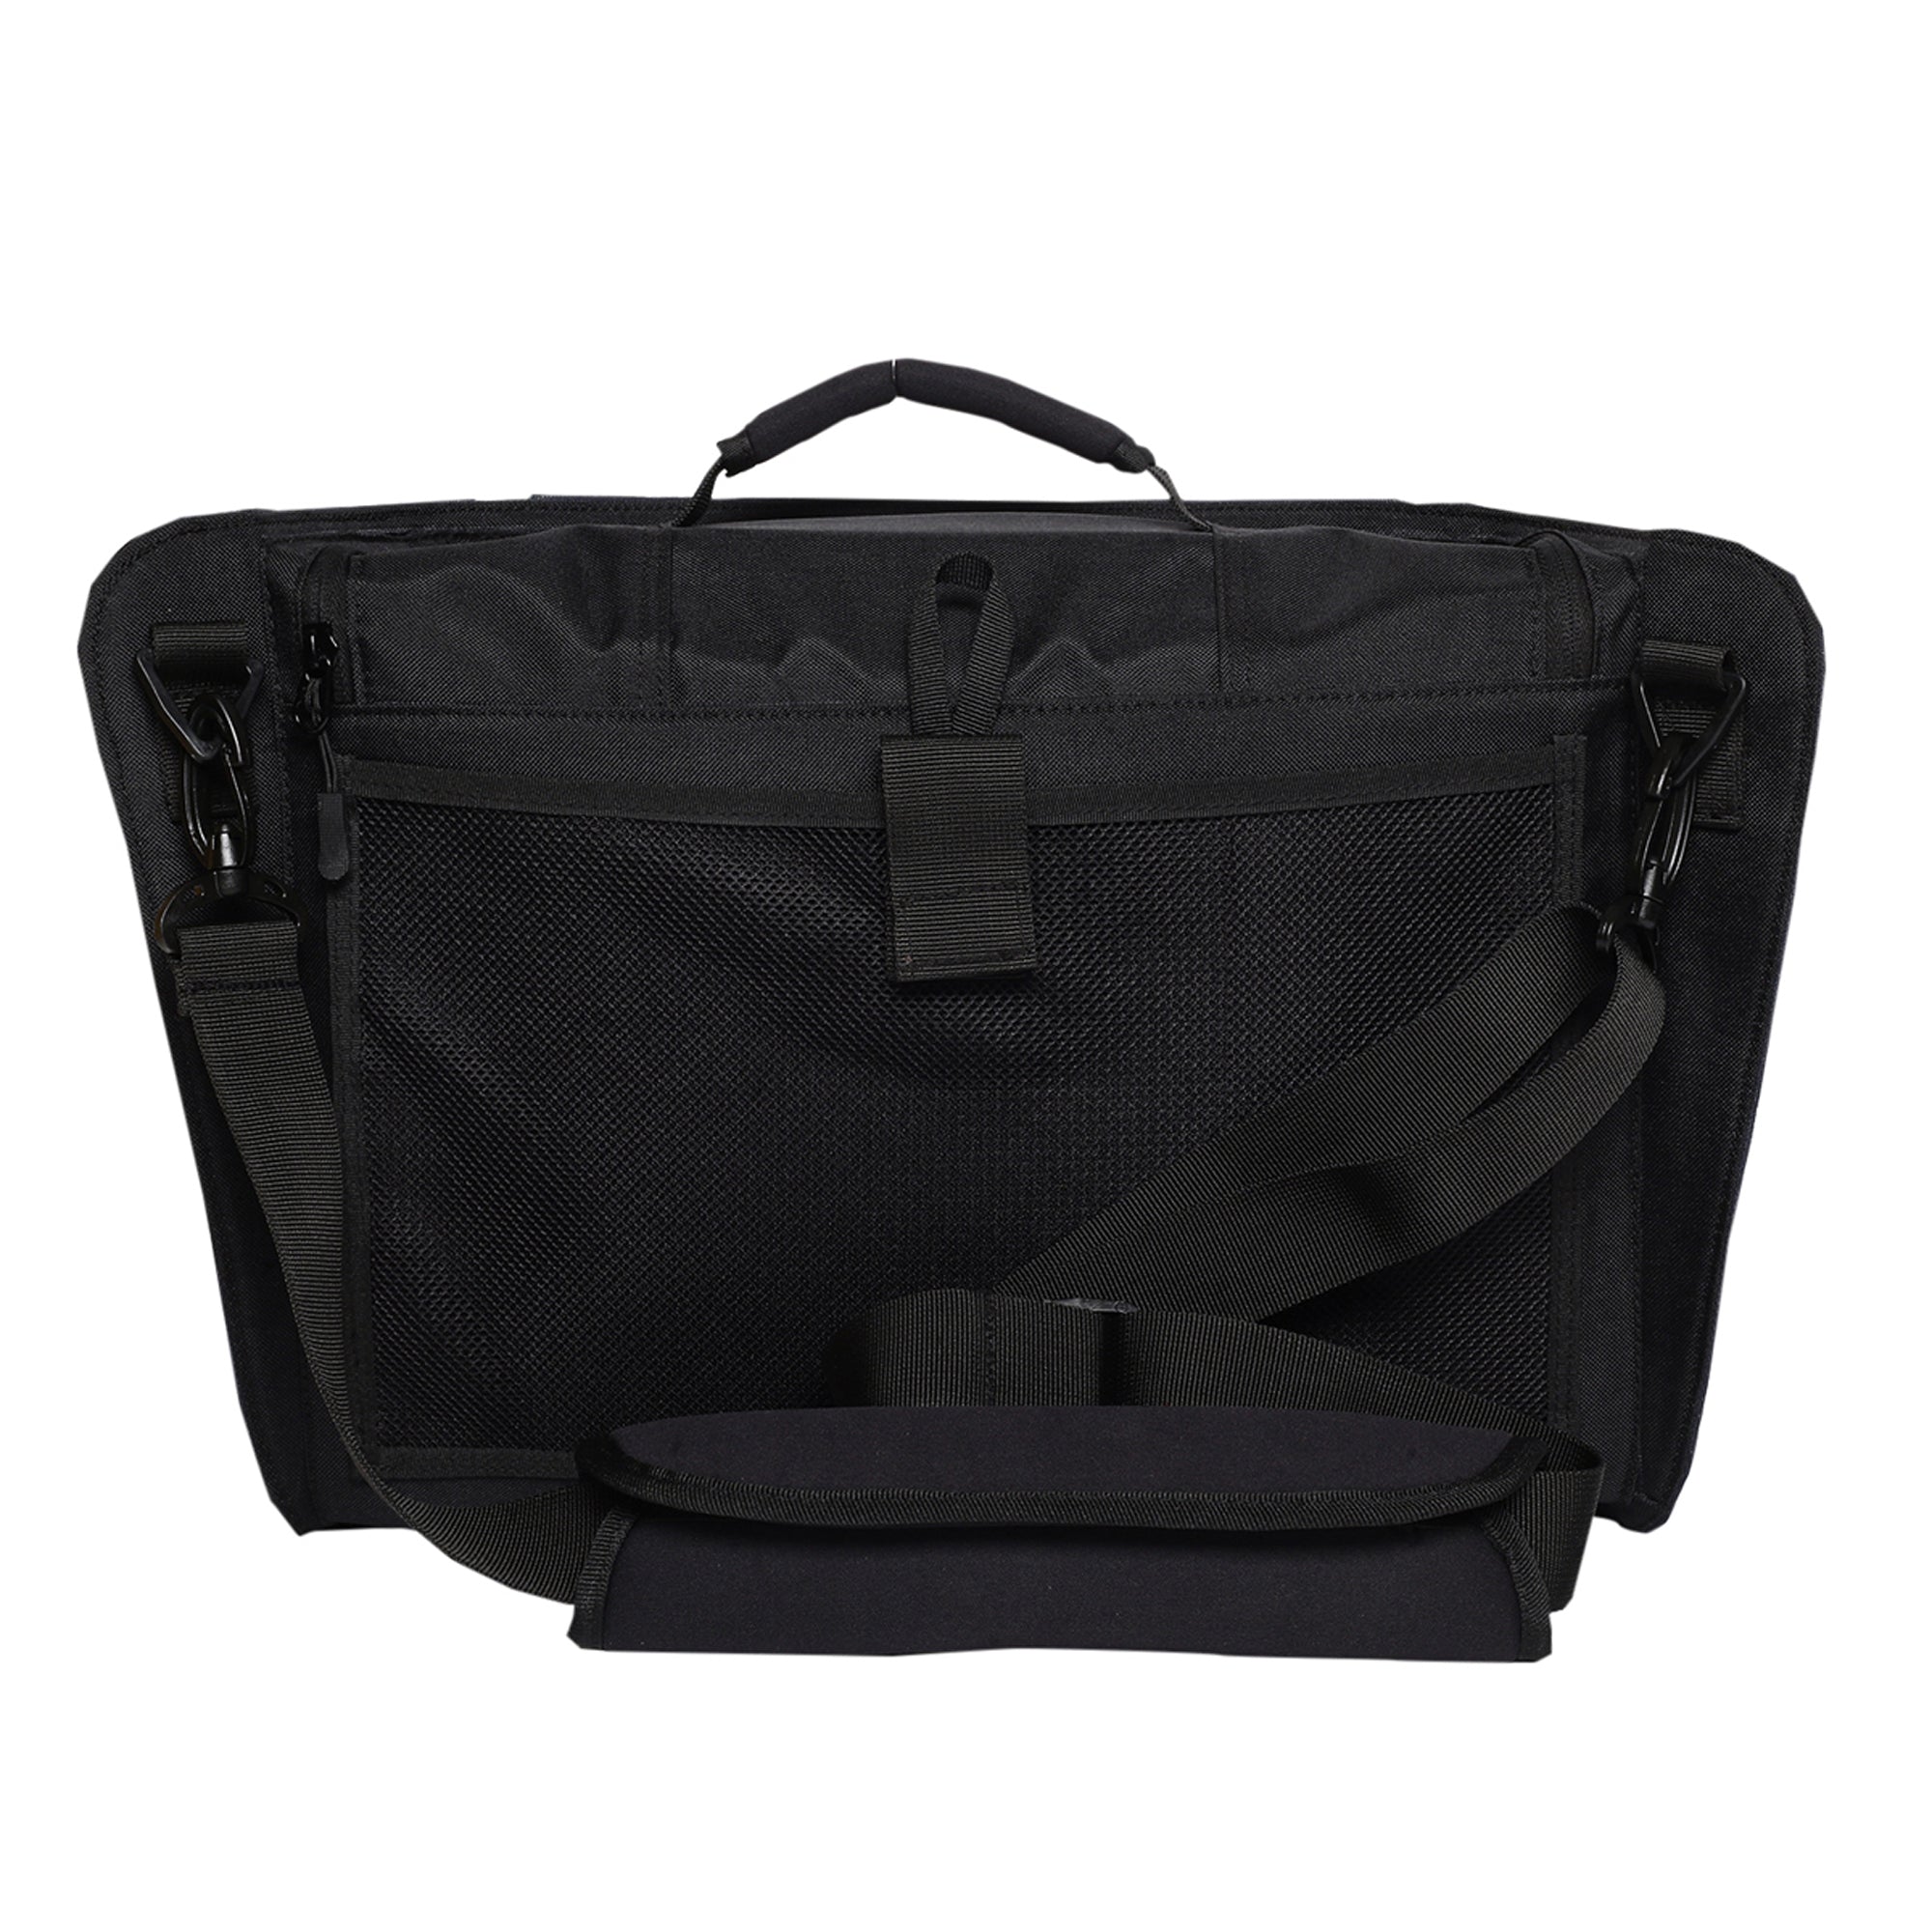  NTORQ FRONT STORAGE BAG - YOUTH